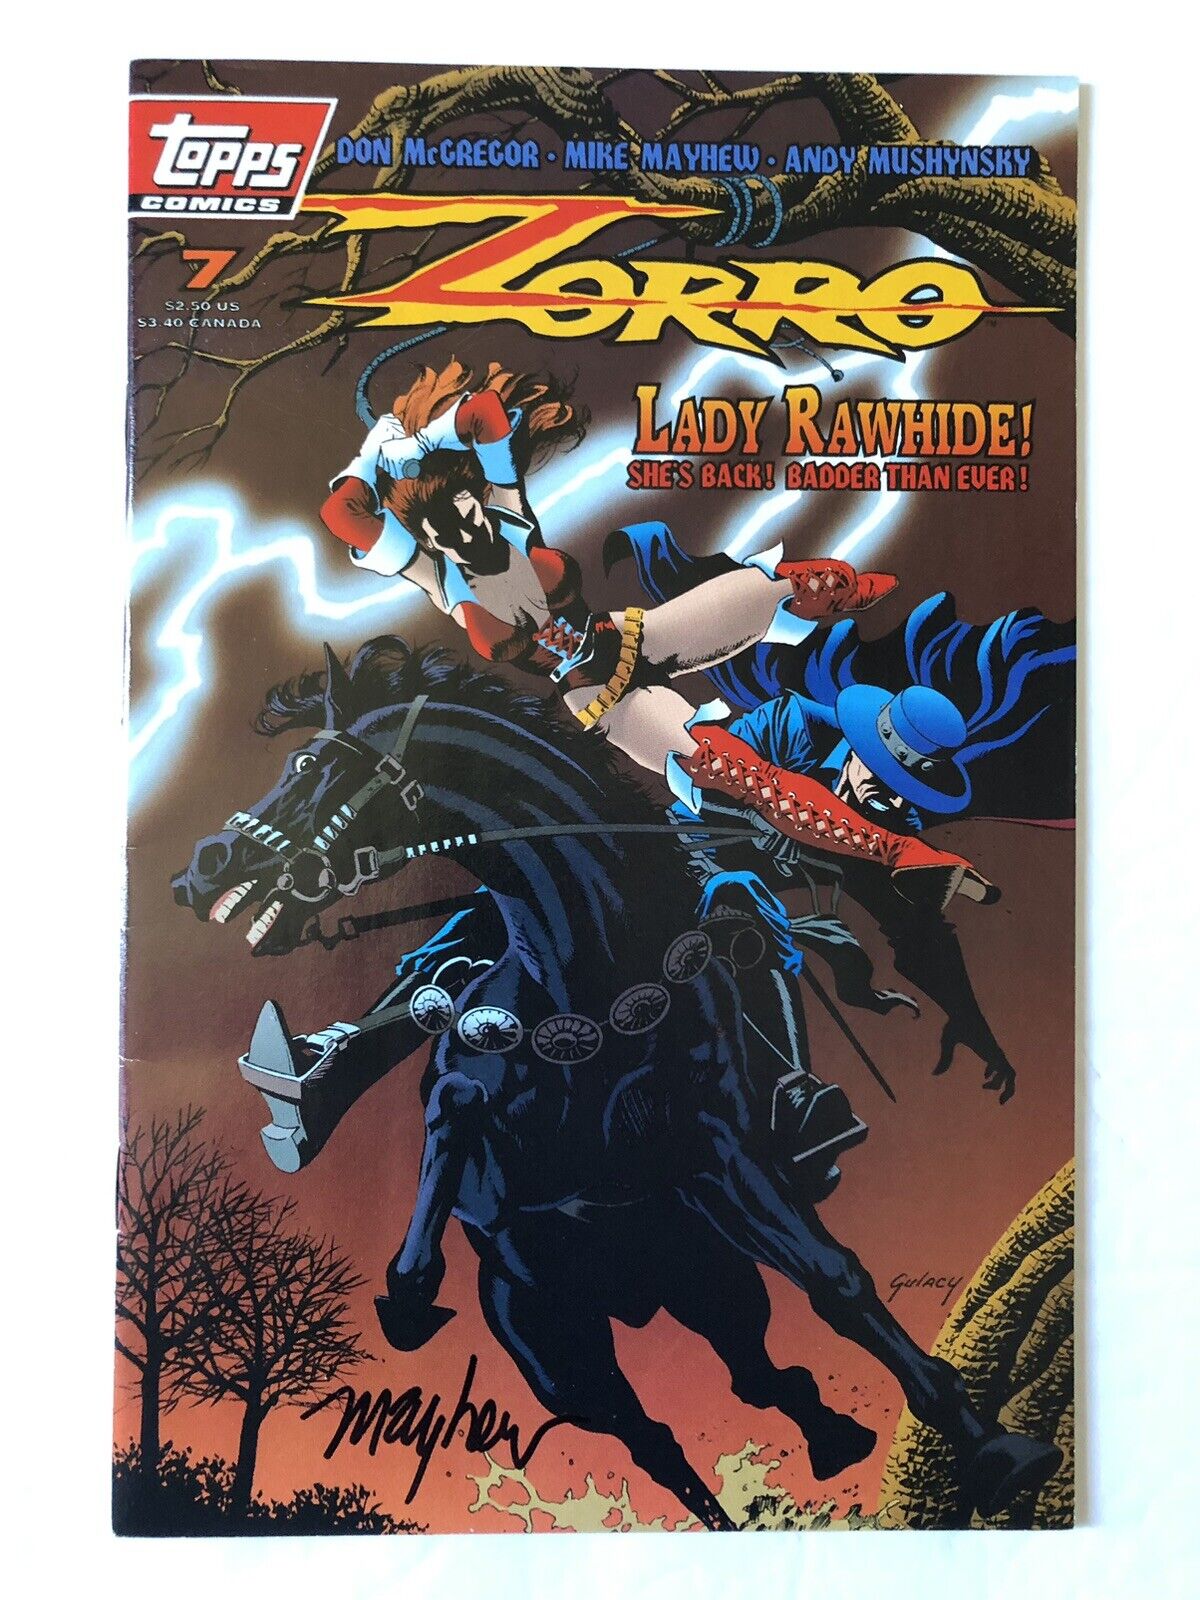 Zorro #7 Signed by Artist Mike Mayhew 1994 Lady Rawhide Paul Gulacy Cover